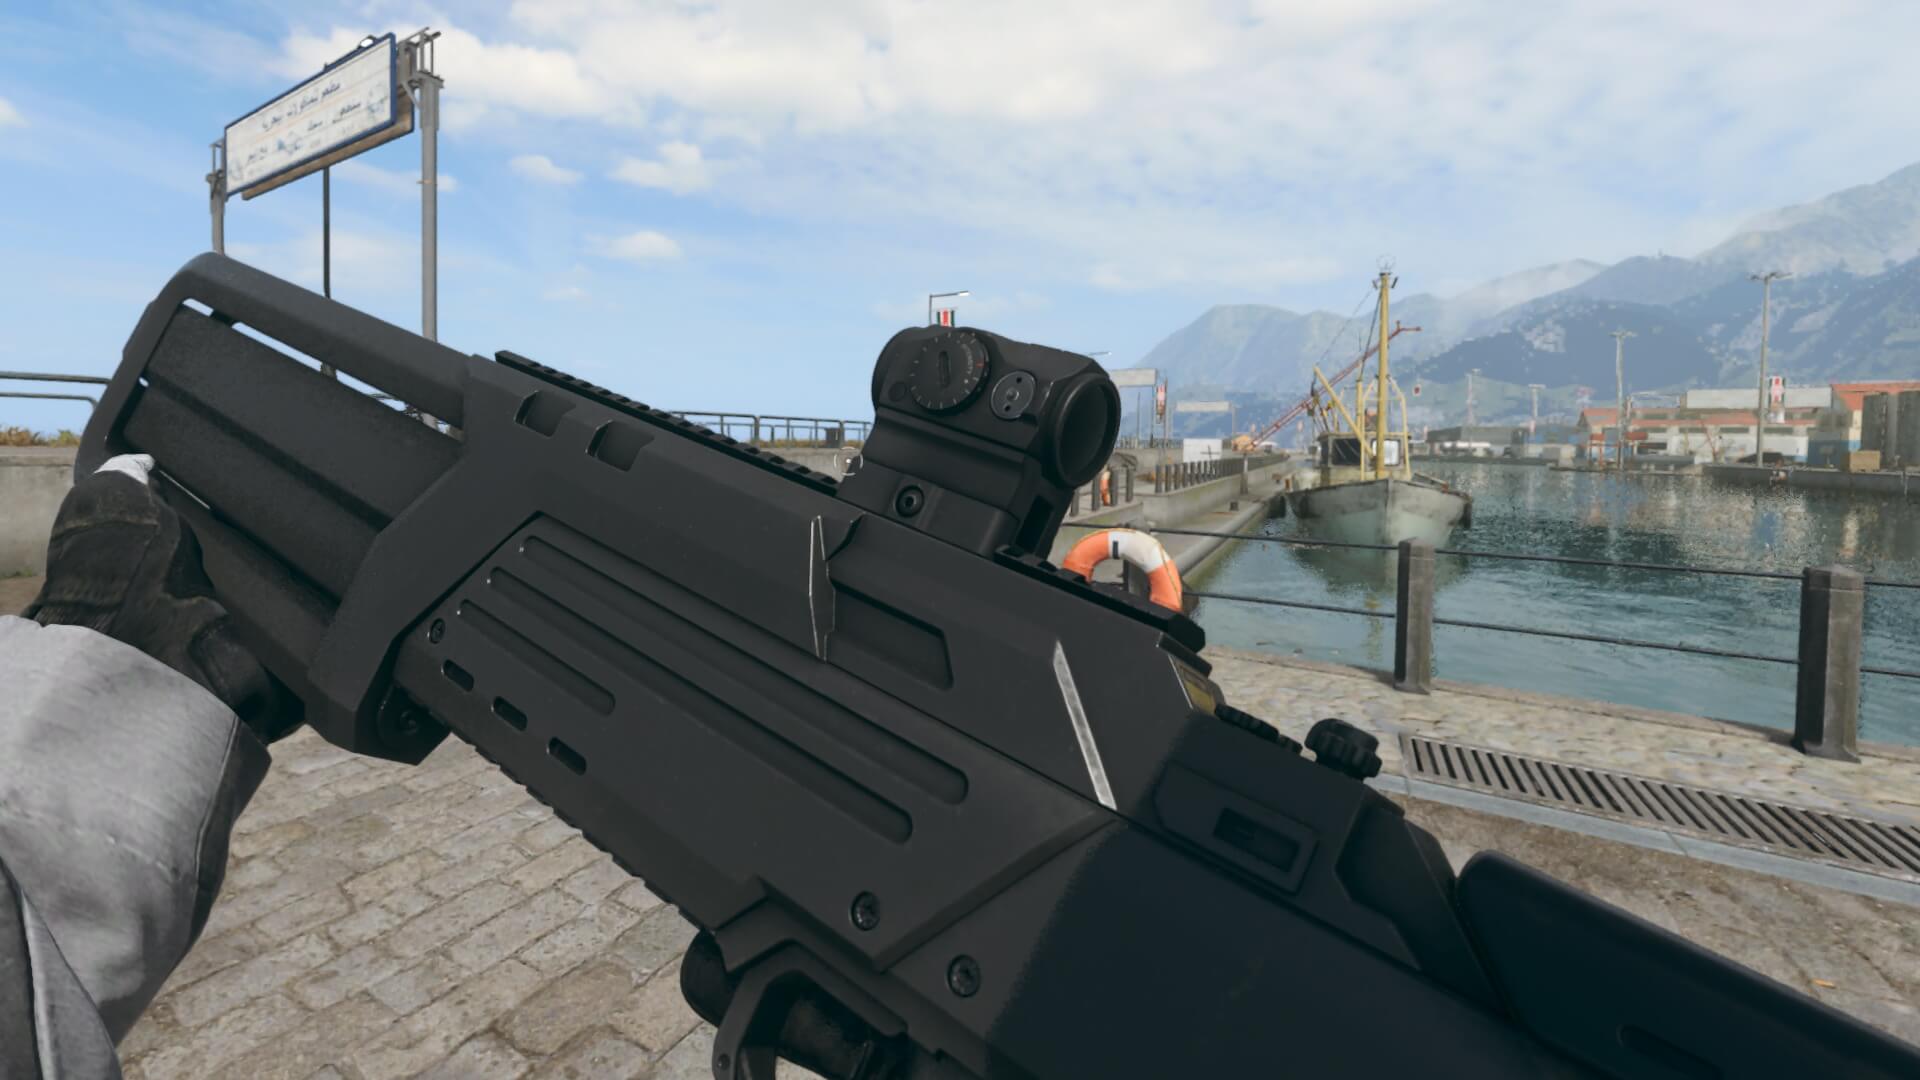 mw3 stormender weapon